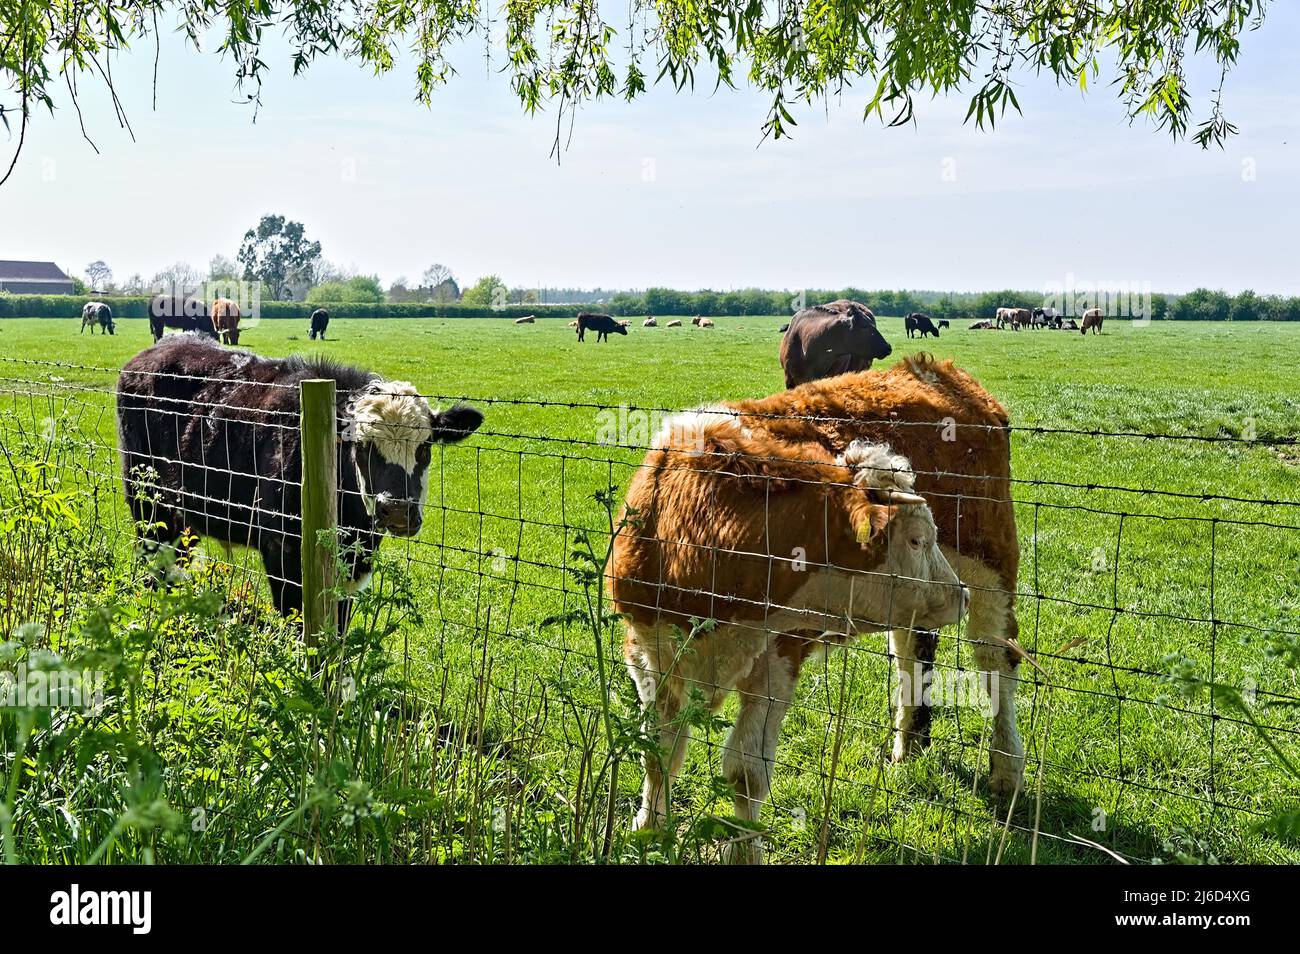 Two brown & white cows (breed unknown) standing by a fence in a field on a sunny springtime day Stock Photo